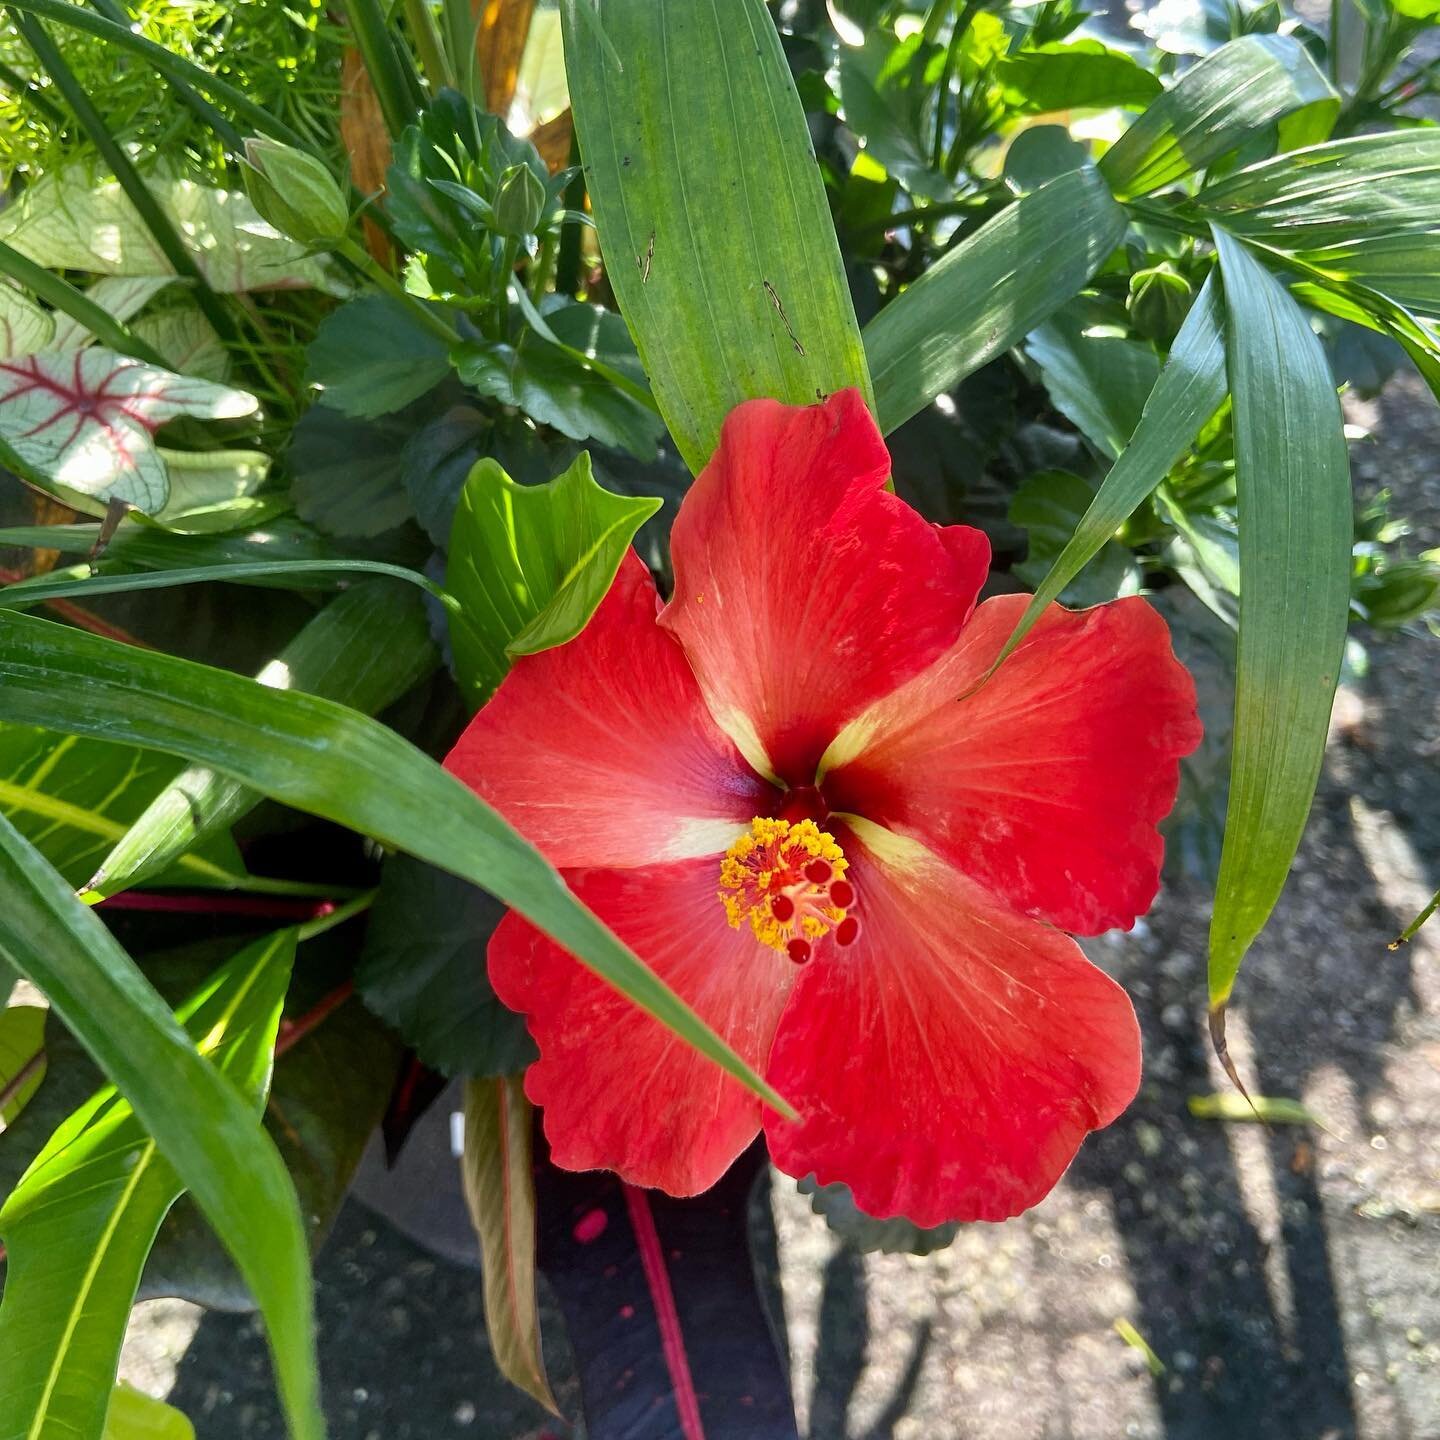 Check out this hibiscus spotted on our new tropical patio pots. So beautiful! 

We&rsquo;re still open and have lots of beautiful fresh stock for you to choose from. Shop our Summer colour SALE now! 

📍2407 Dougall Ave (Dorwin Plaza)
📍8400 Wyandott